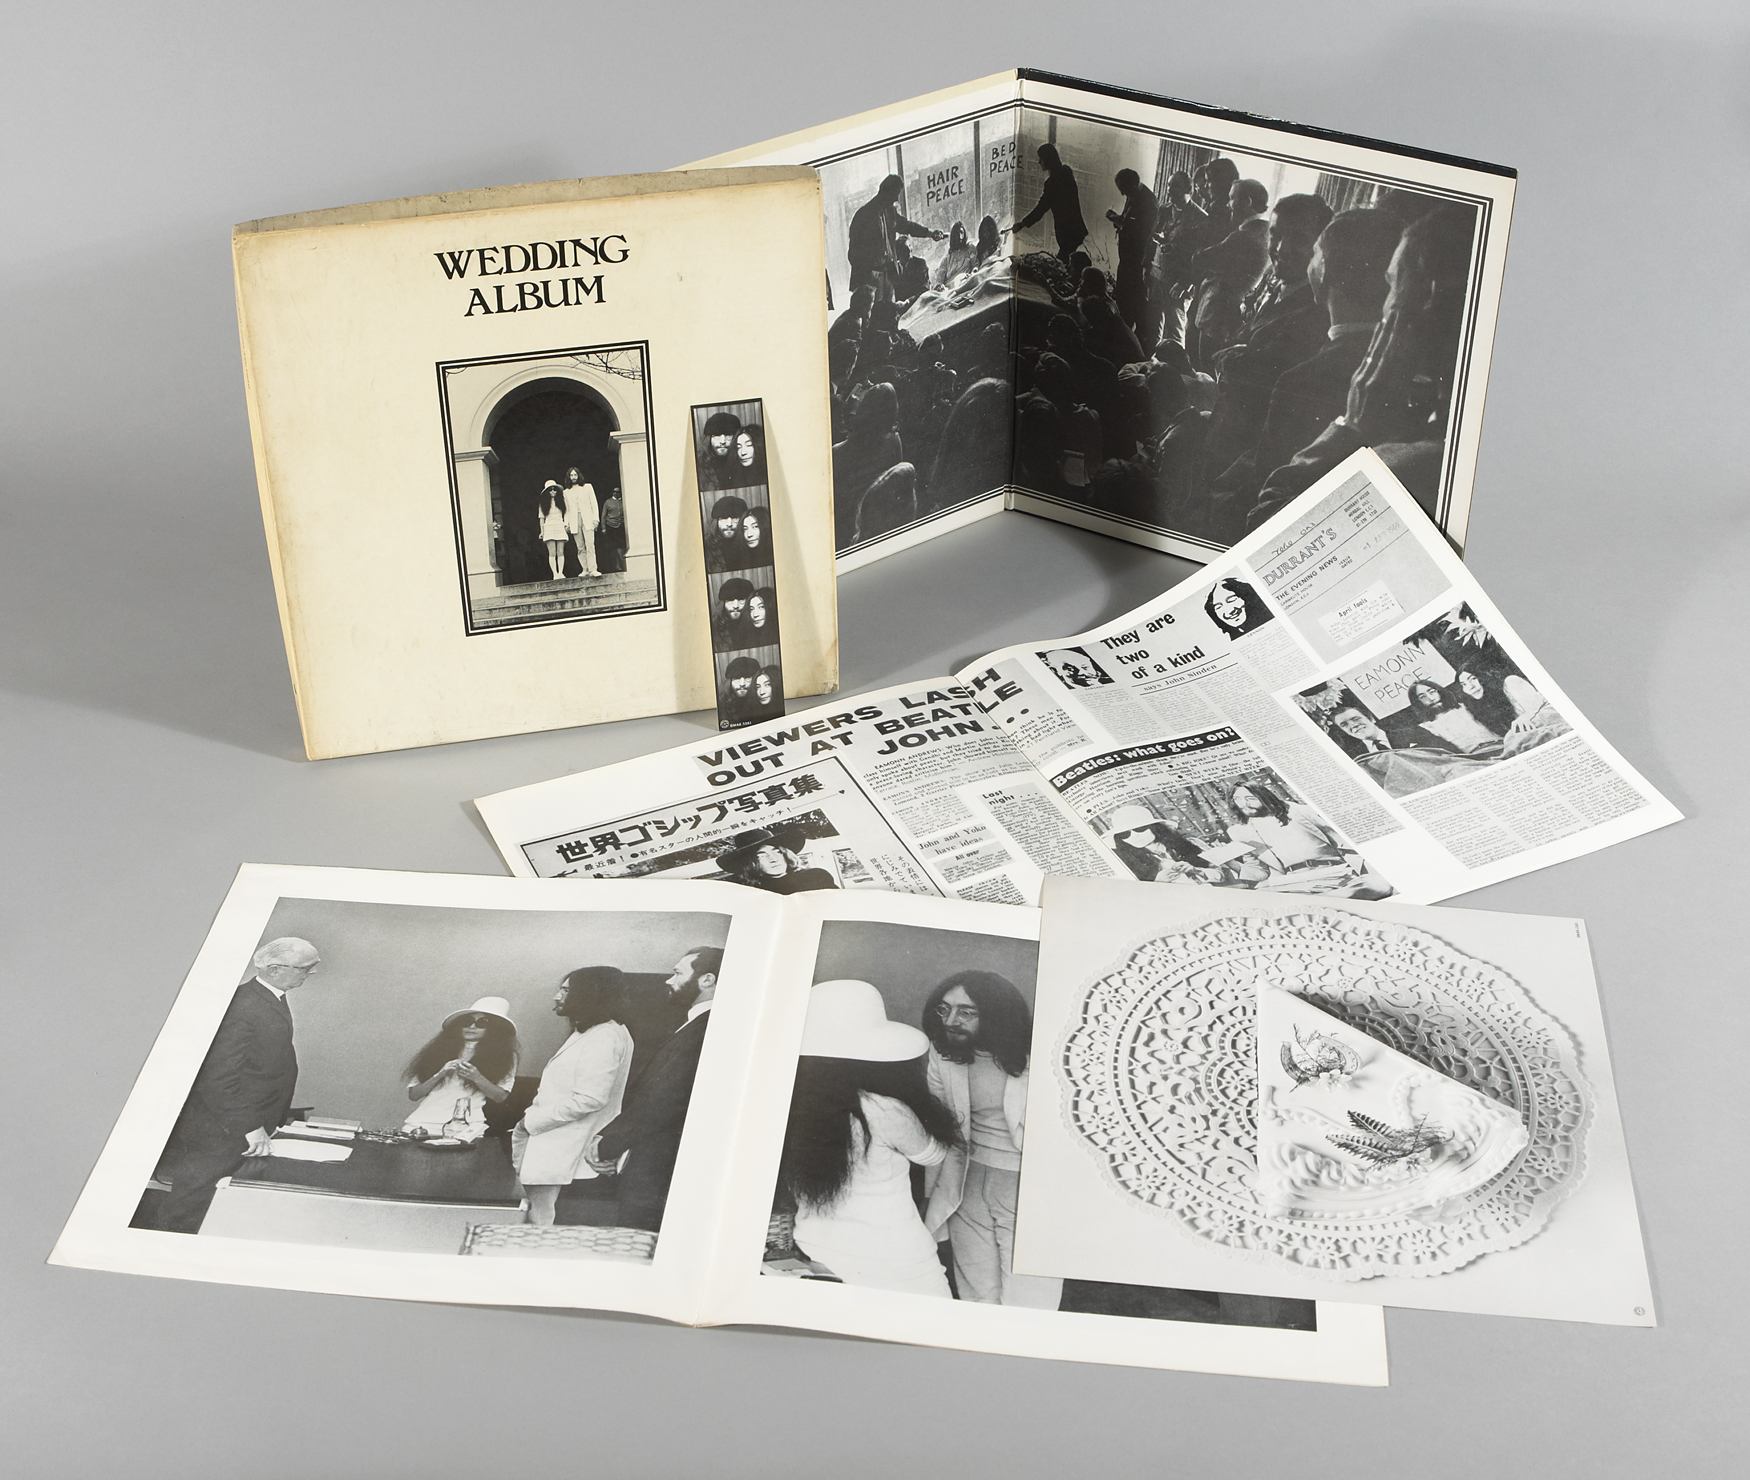 John Lennon and Yoko Ono: The Wedding Album 1969 at Whyte's Auctions